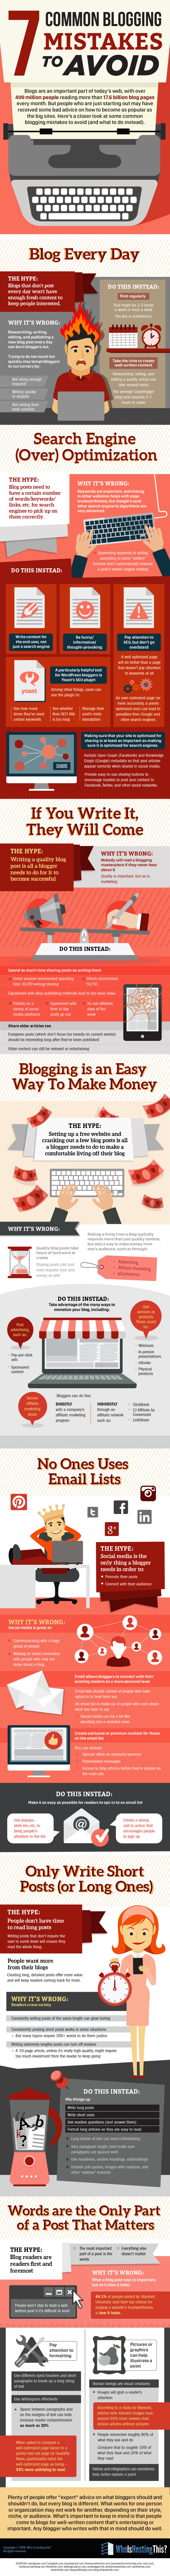 7-common-blogging-mistakes-and-how-to-fix-them-infographic-image